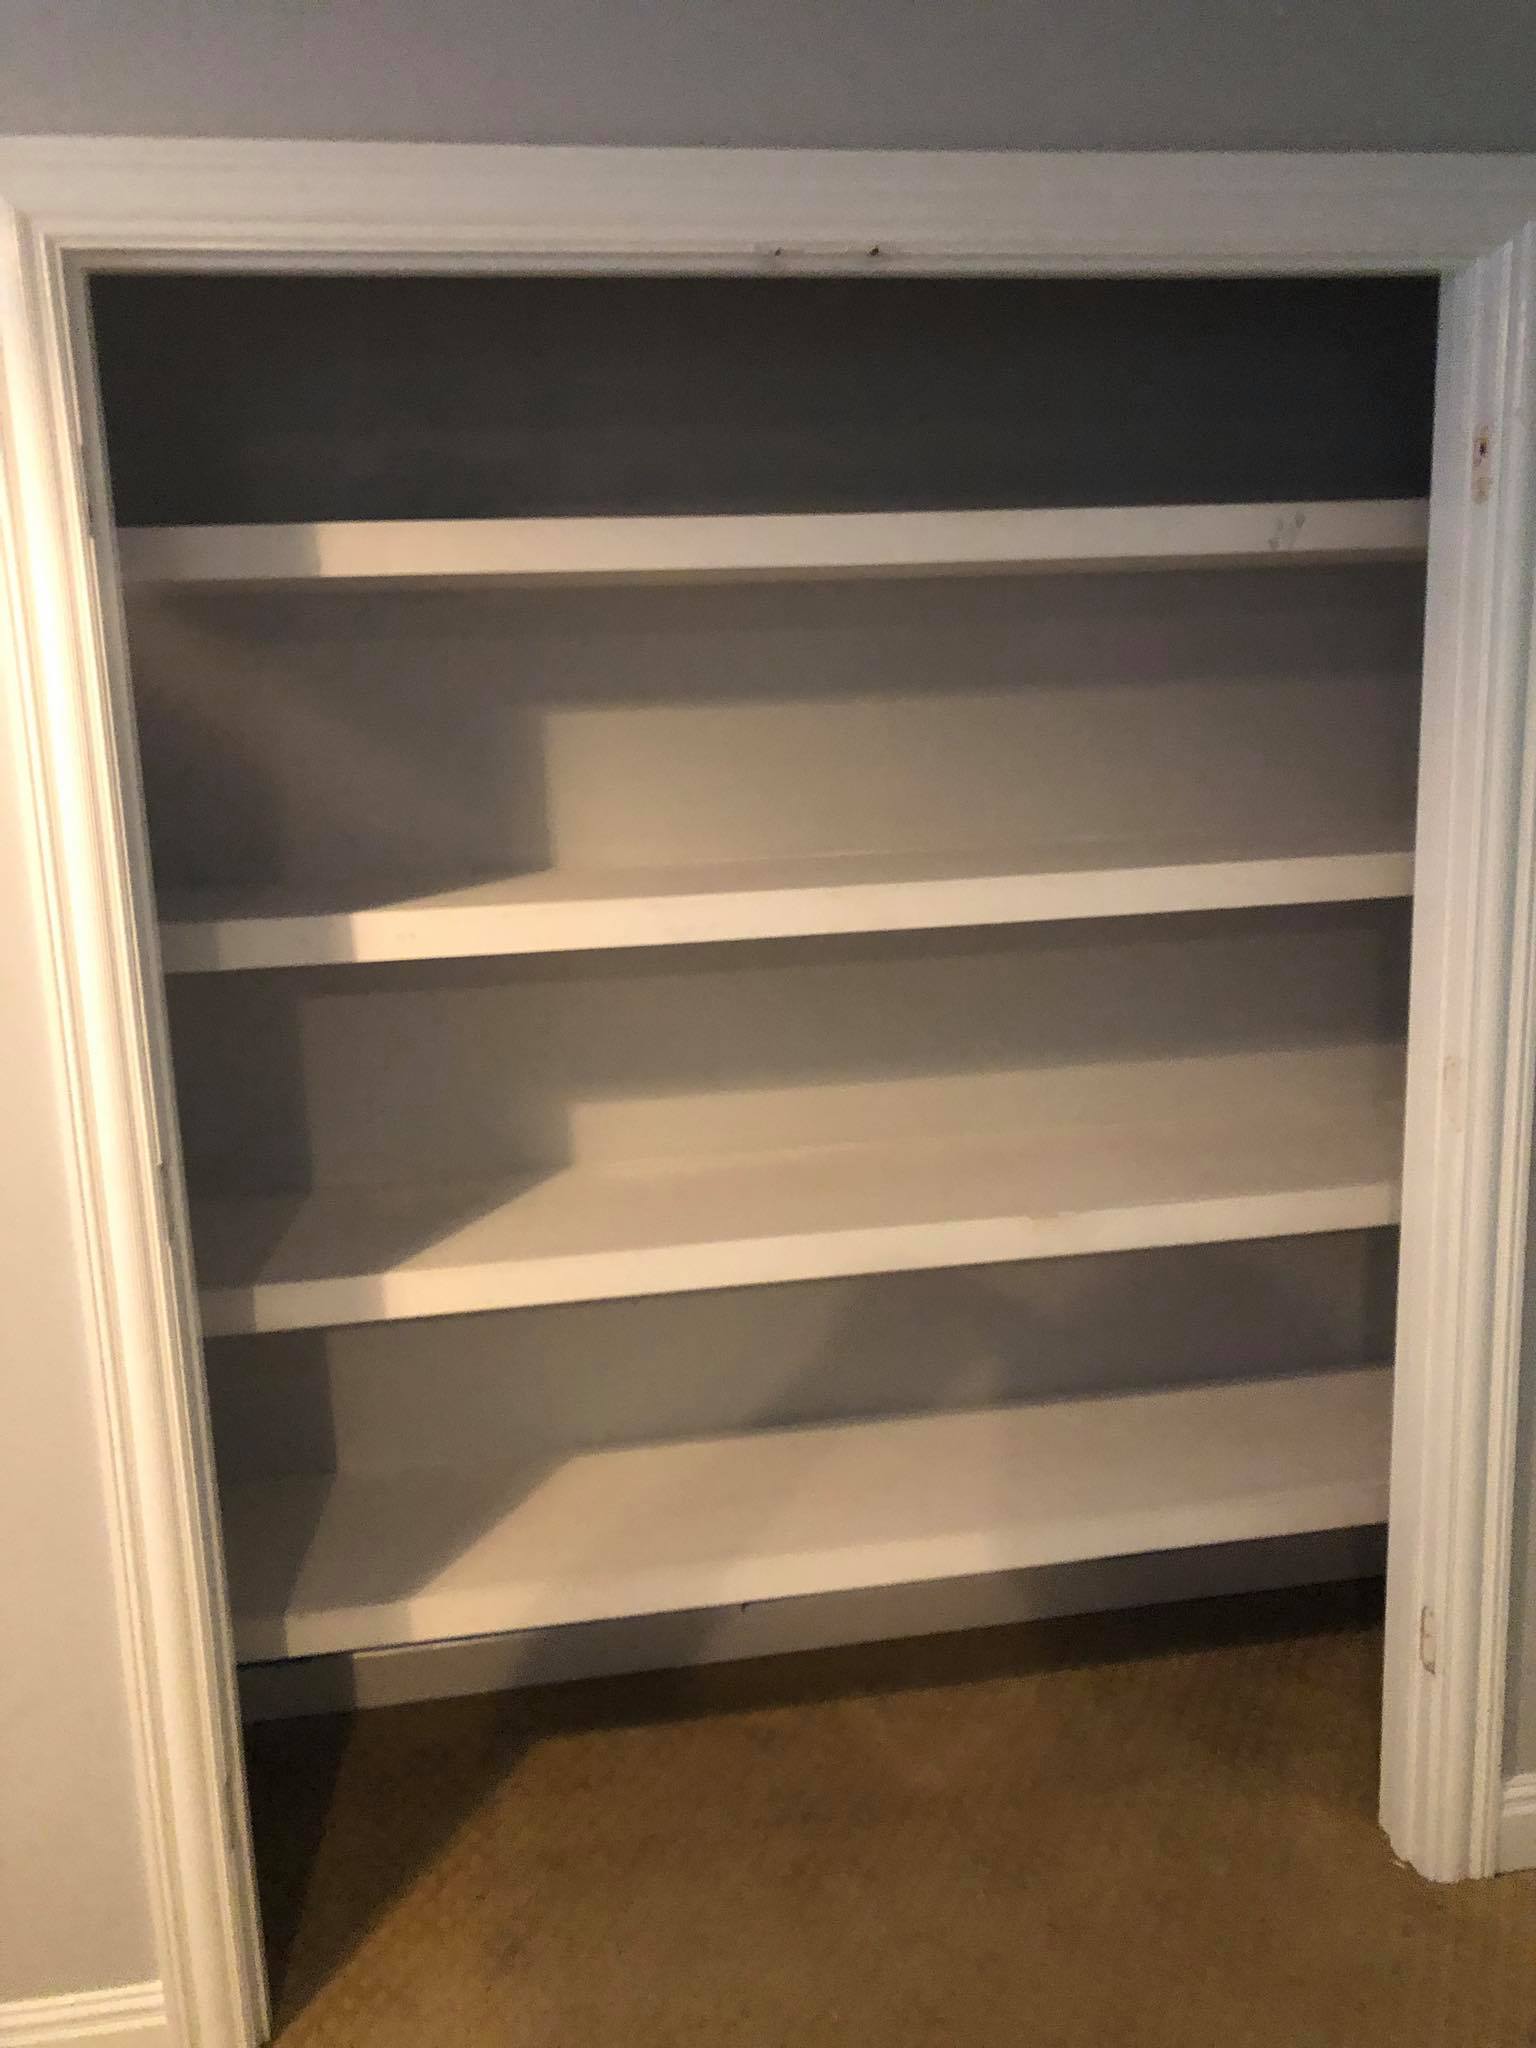 Closet Space Floating Shelves Installed Painted White with Trim 6